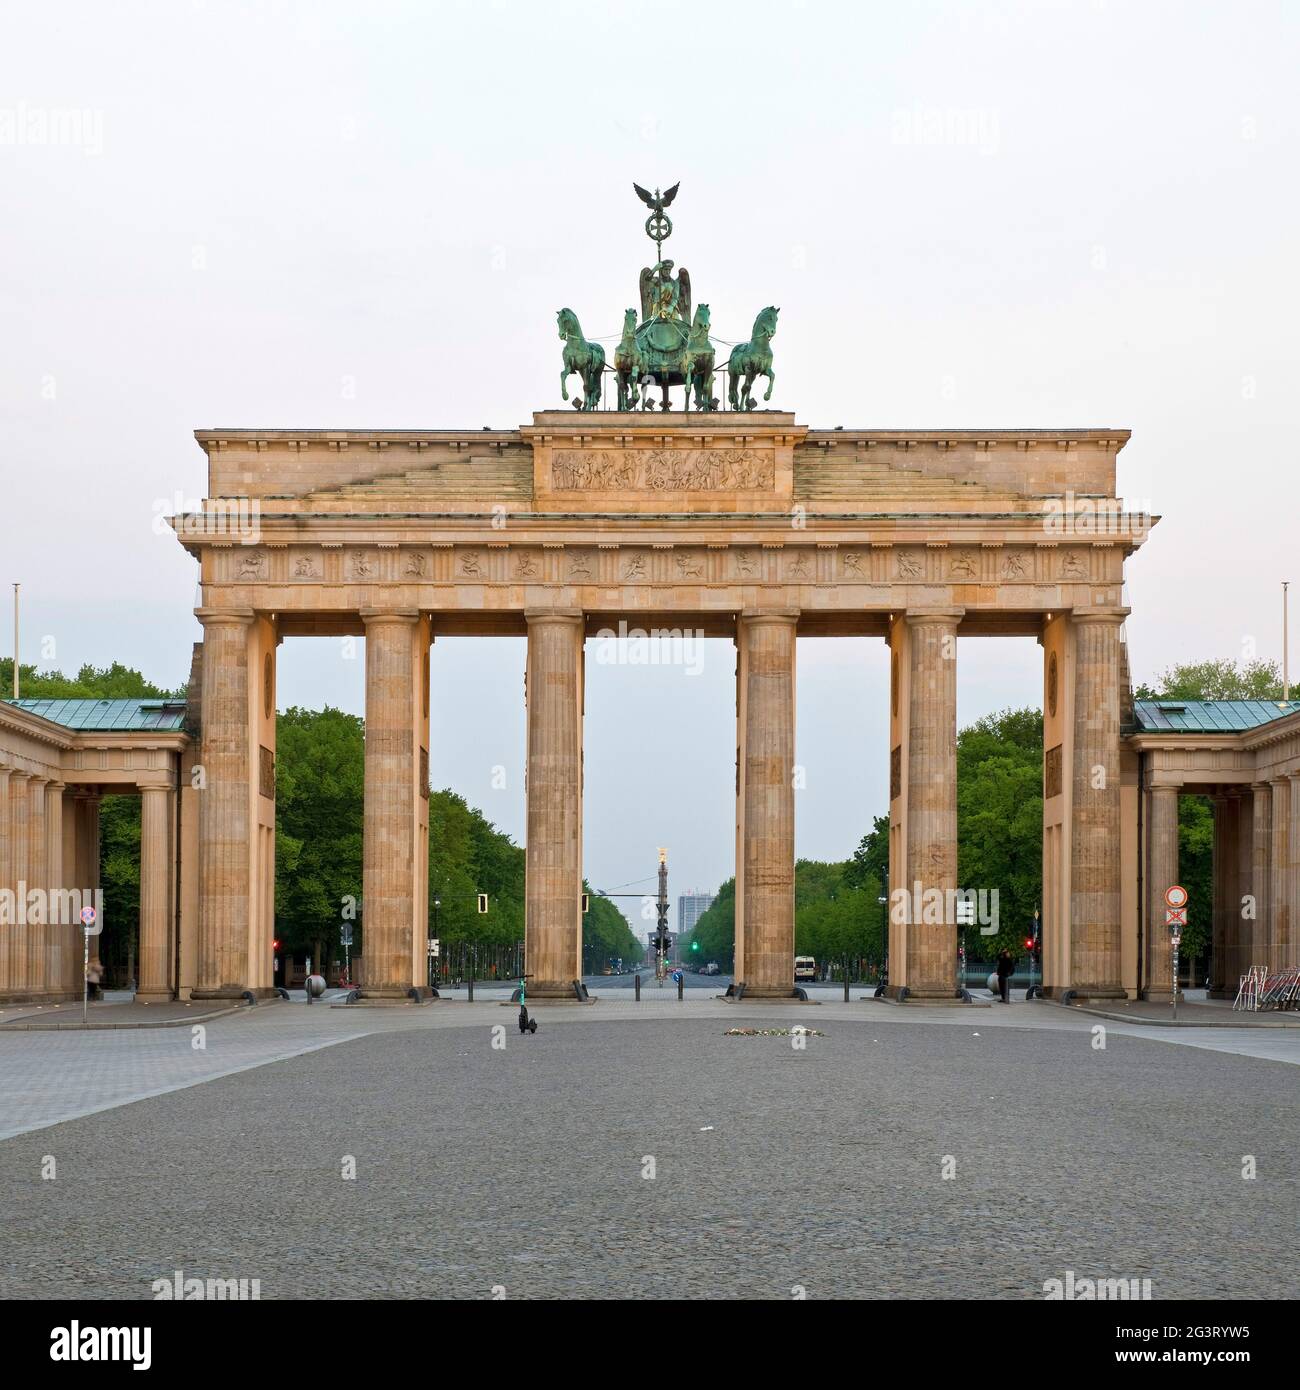 Brandenburger Tor with deserted Pariser Platz (Paris Square) early in the morning, Germany, Berlin Stock Photo